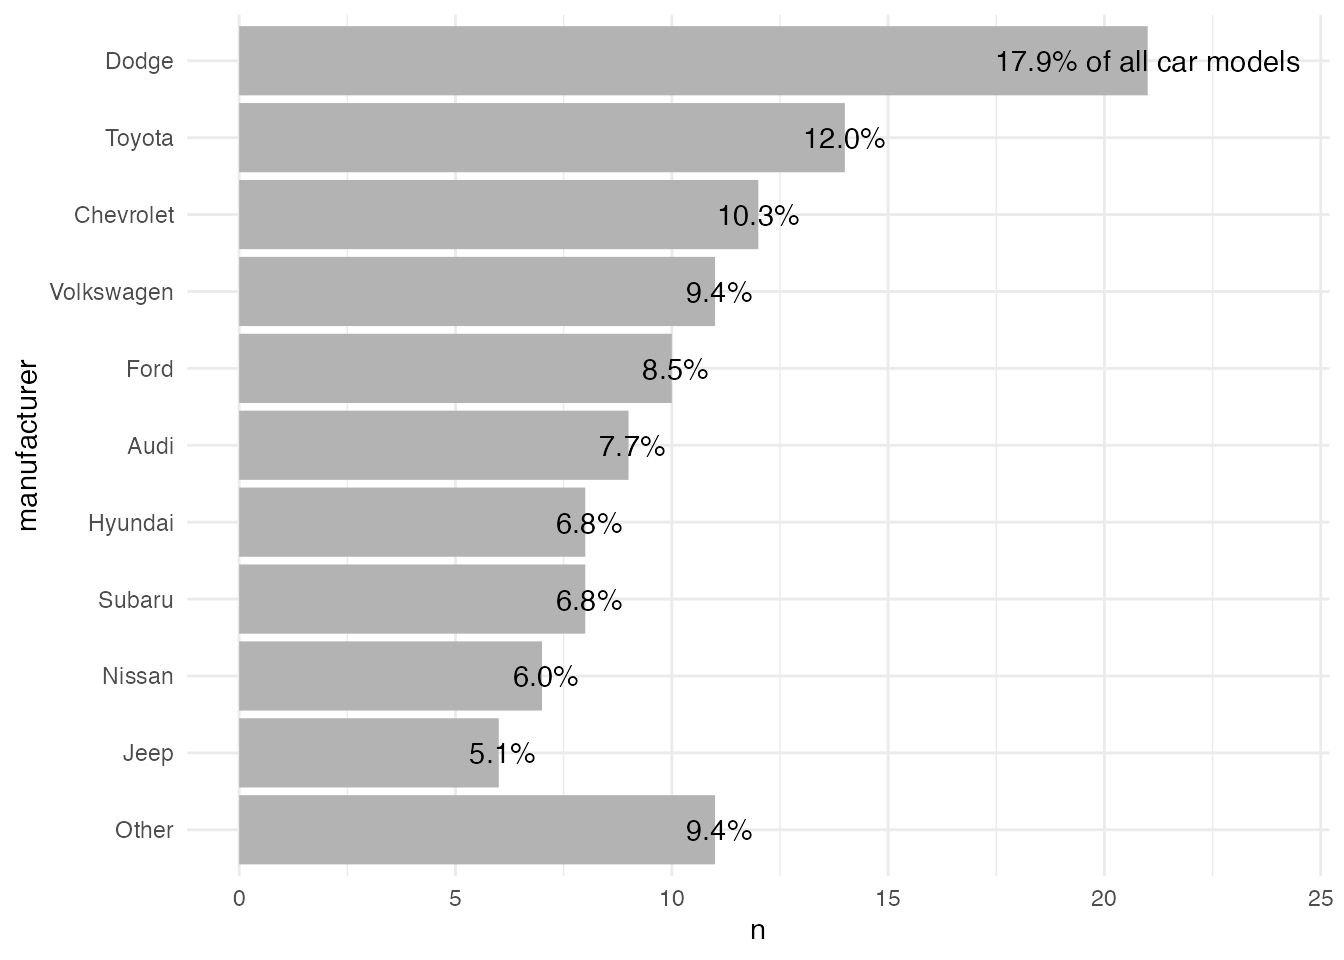 A Quick How-To On Labelling Bar Graphs In Ggplot2 - Cédric Scherer